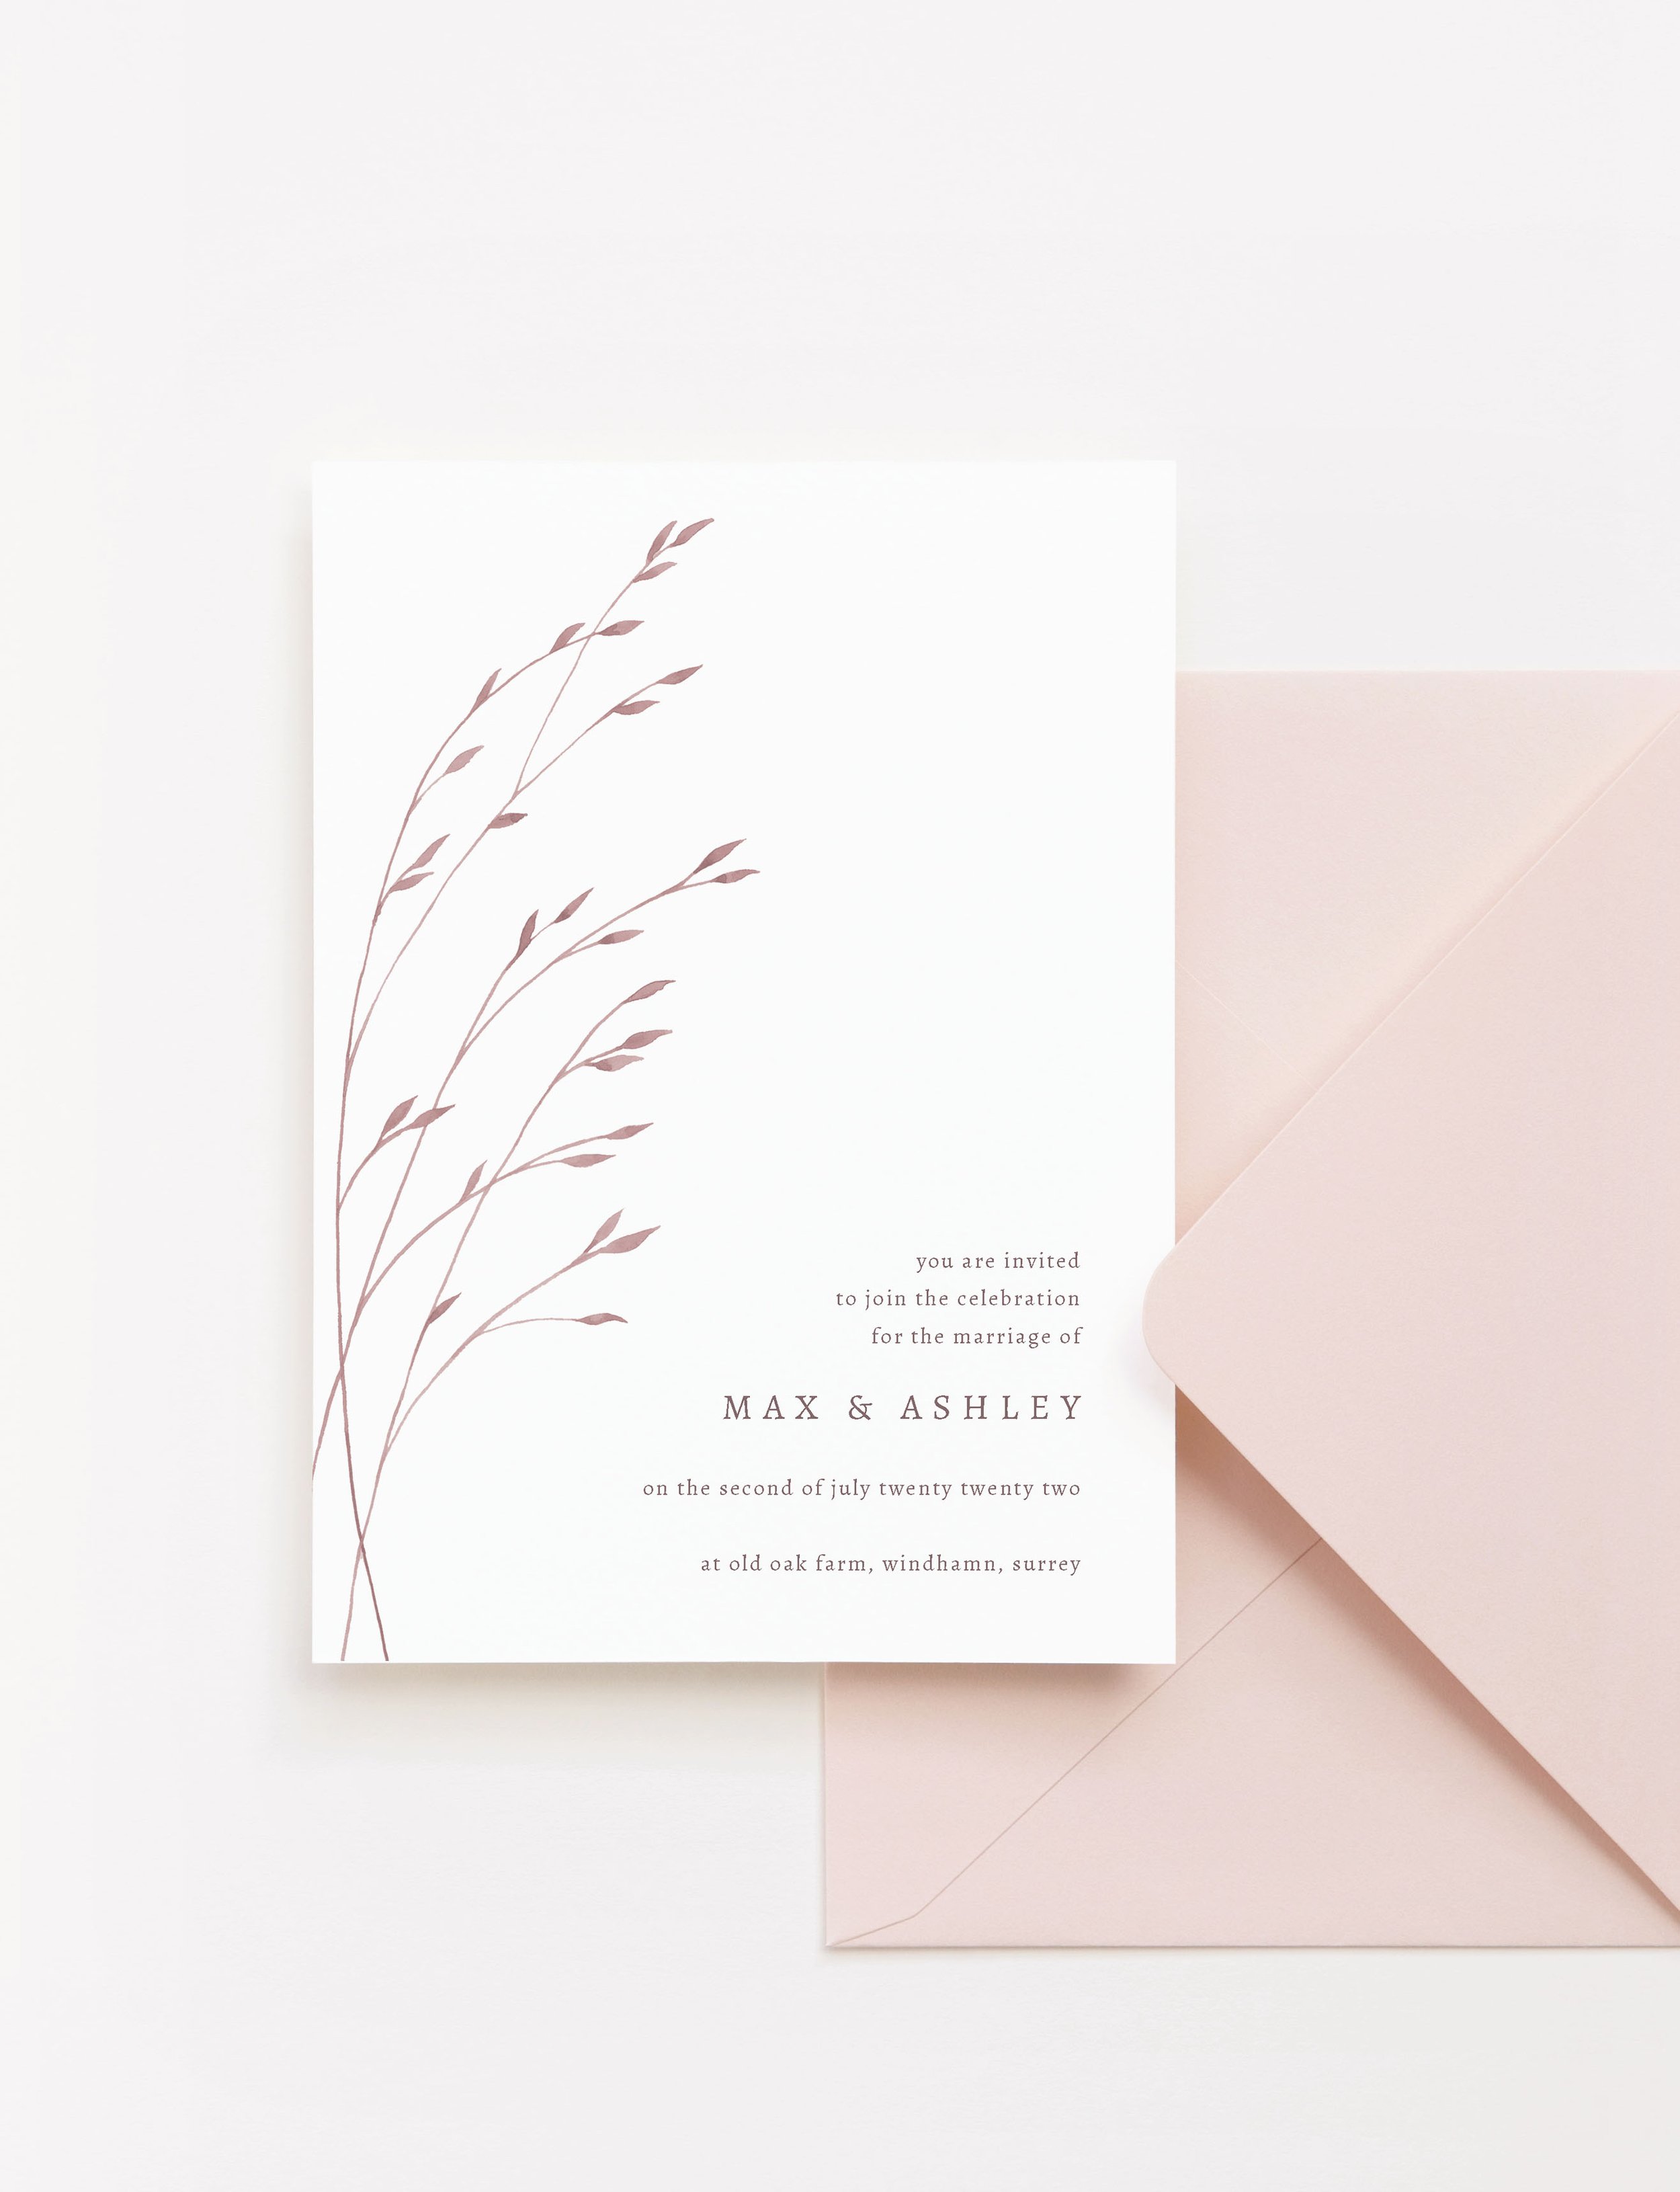 Blush Pink Wedding Invitation with Wildflowers Dried Flowers Dried Grasses Blush and Dusty Pink.jpg